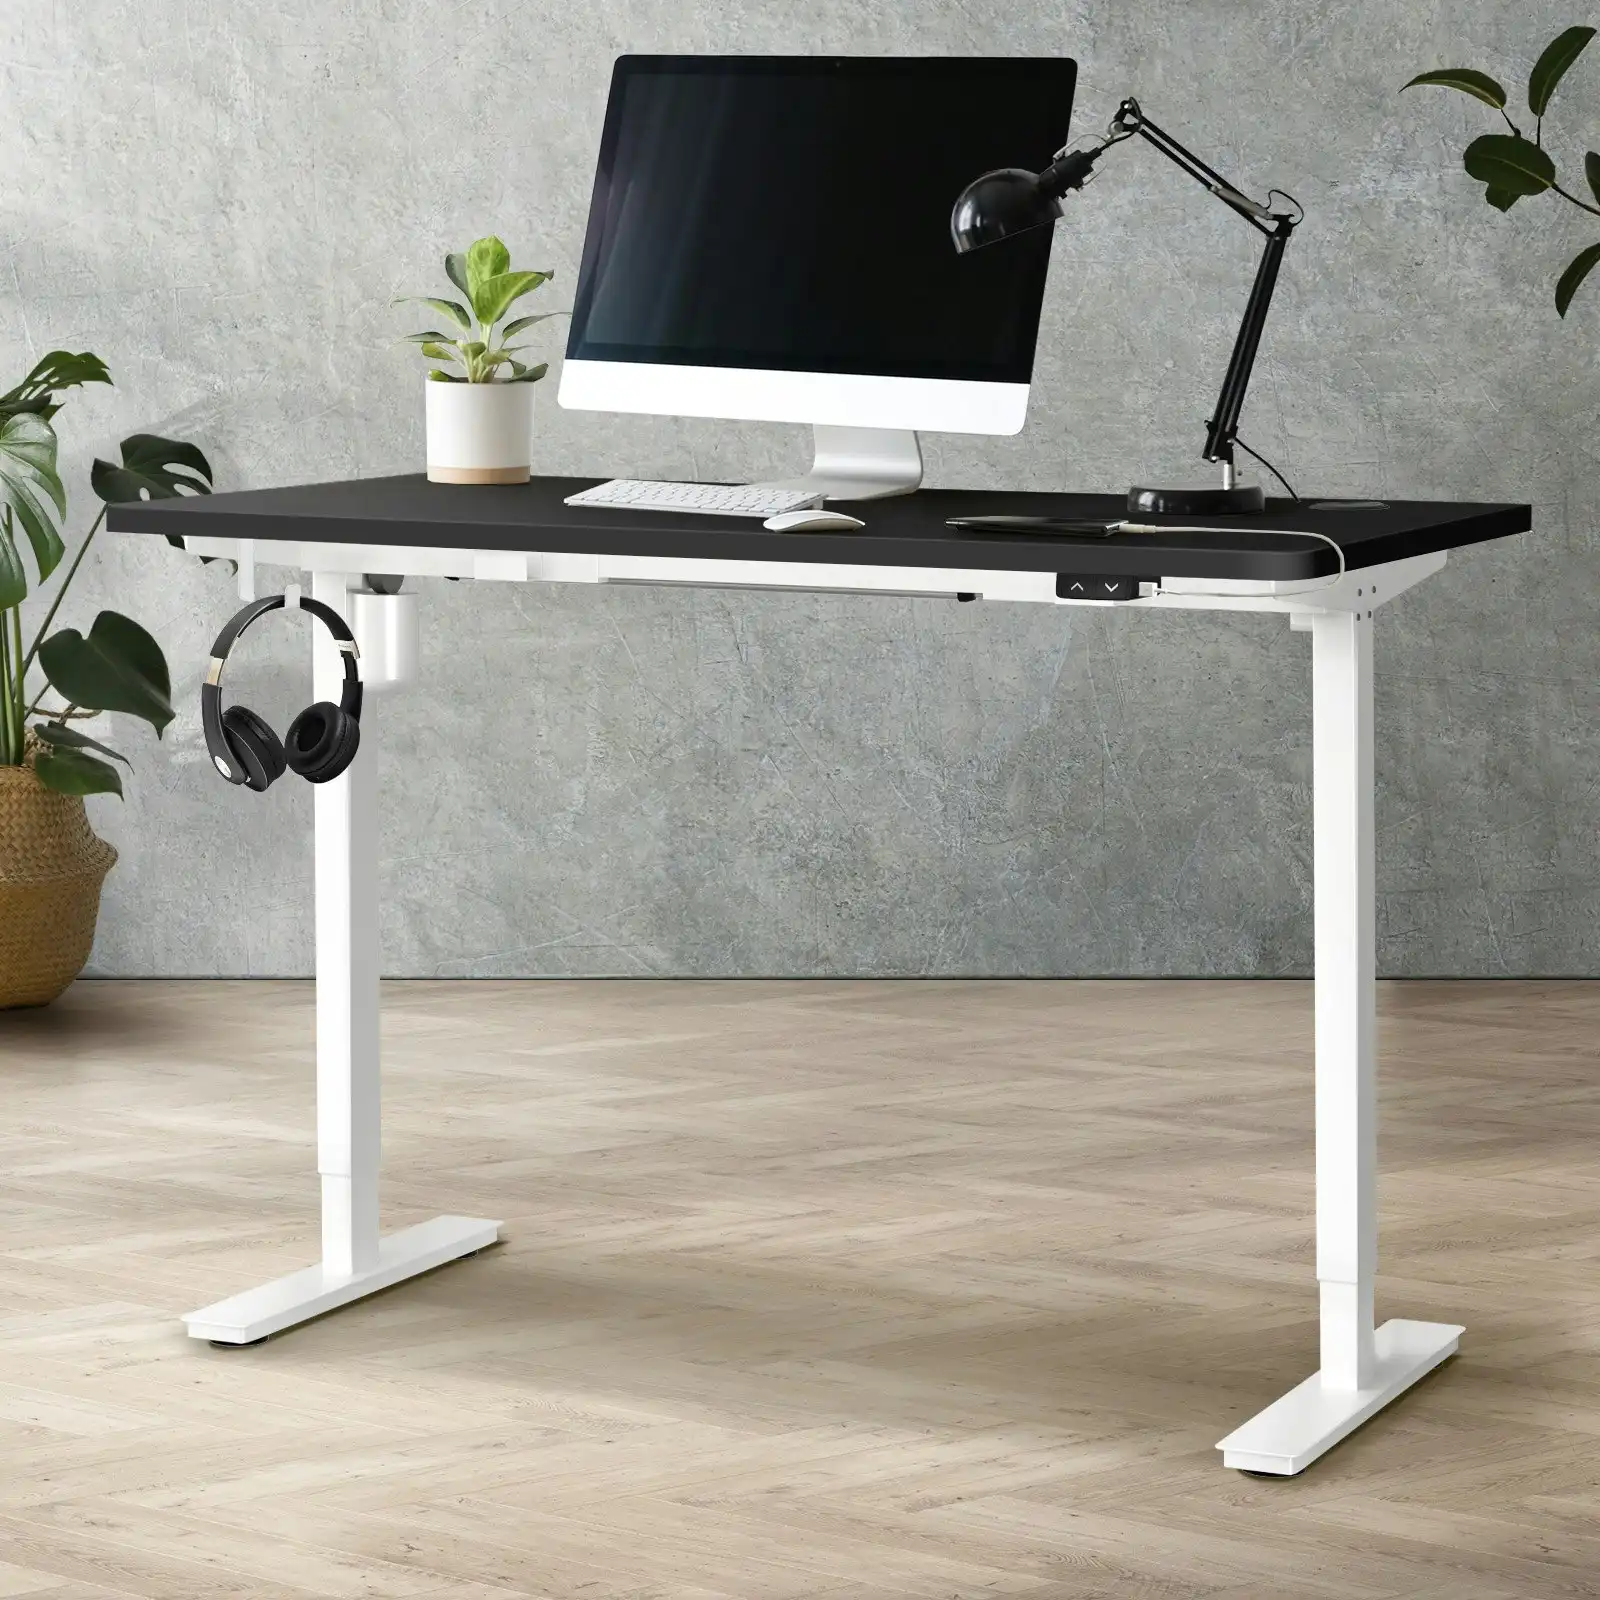 Oikiture 140CM Electric Standing Desk Single Motor Table Top Black